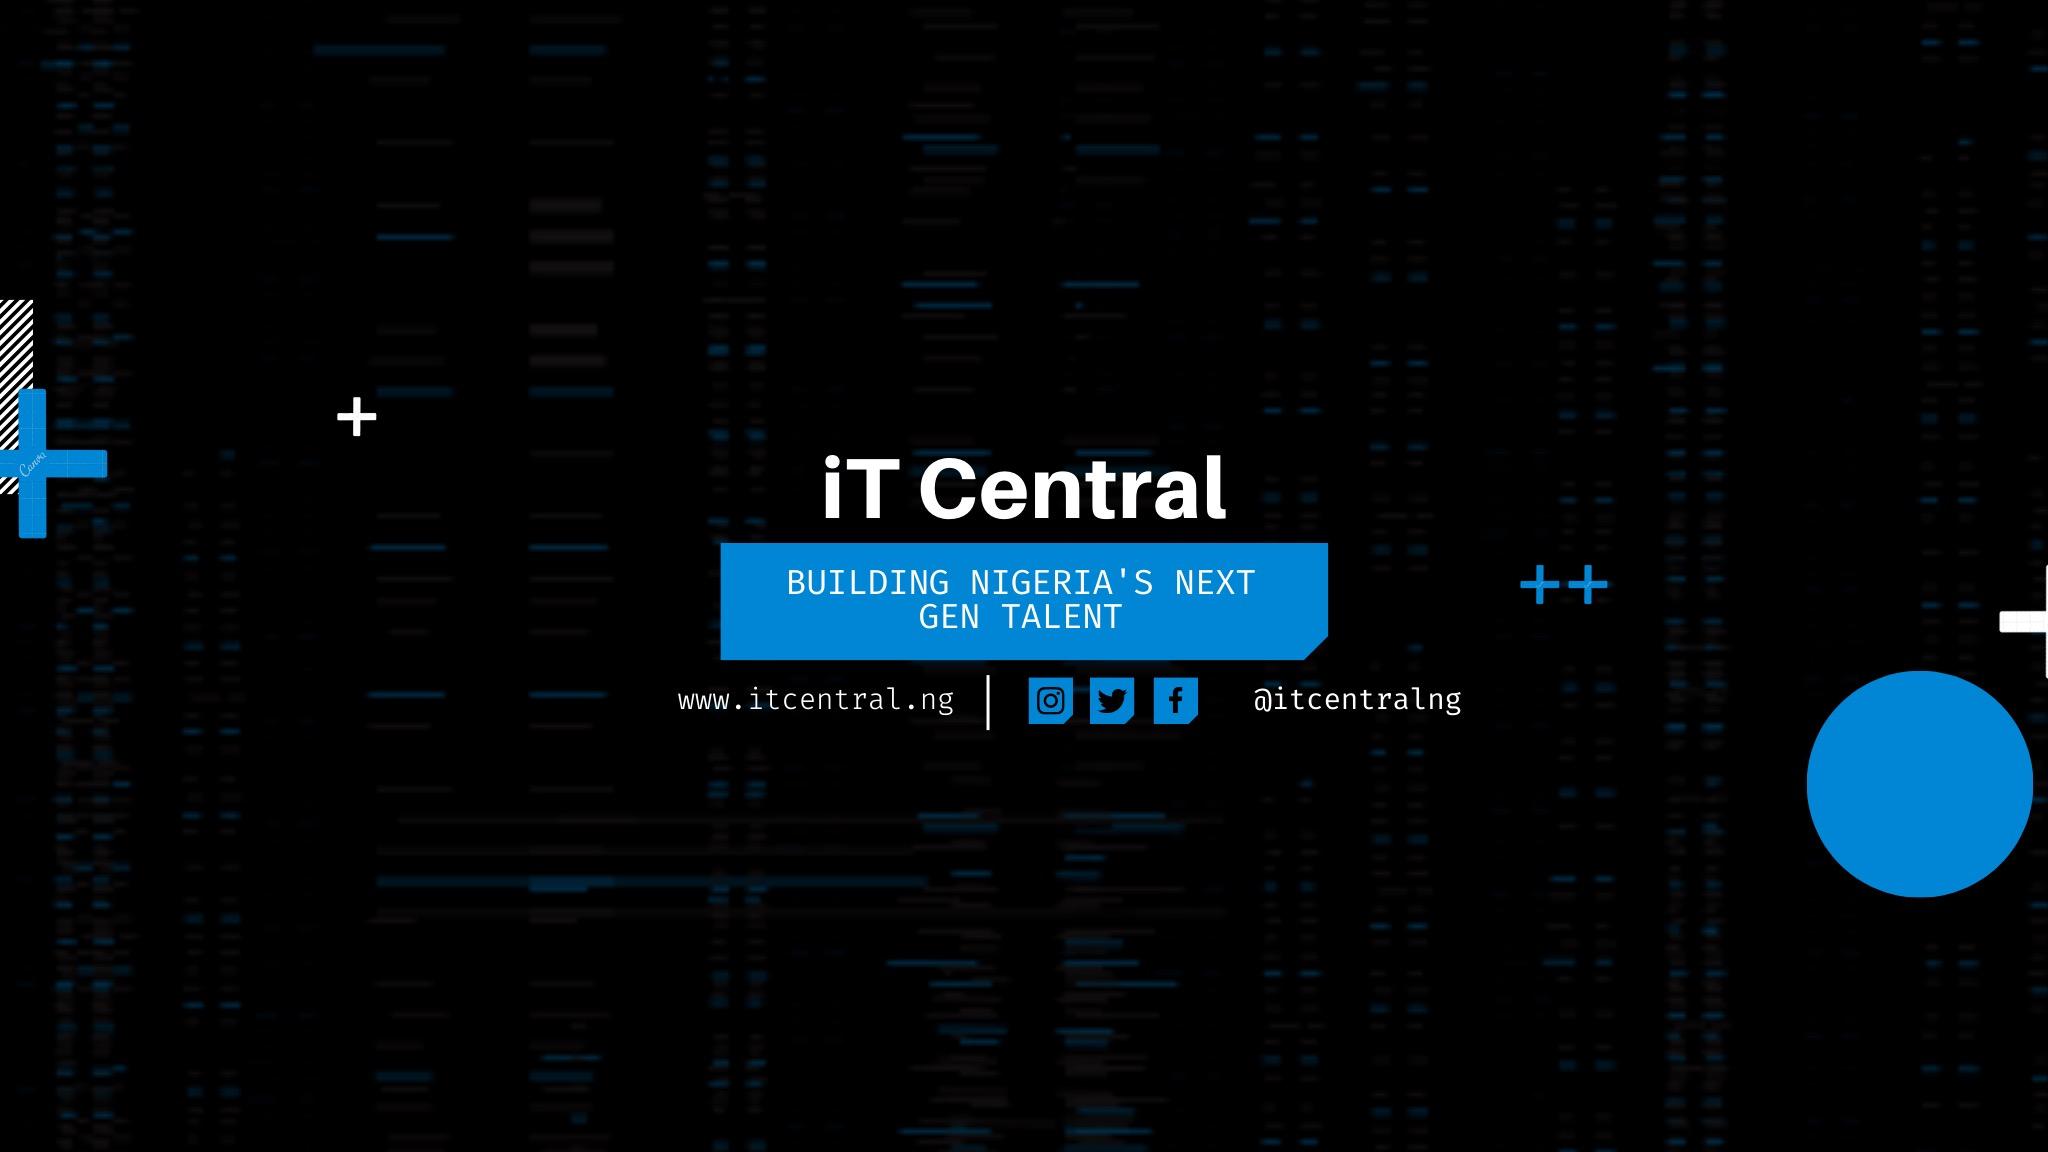 iT Central